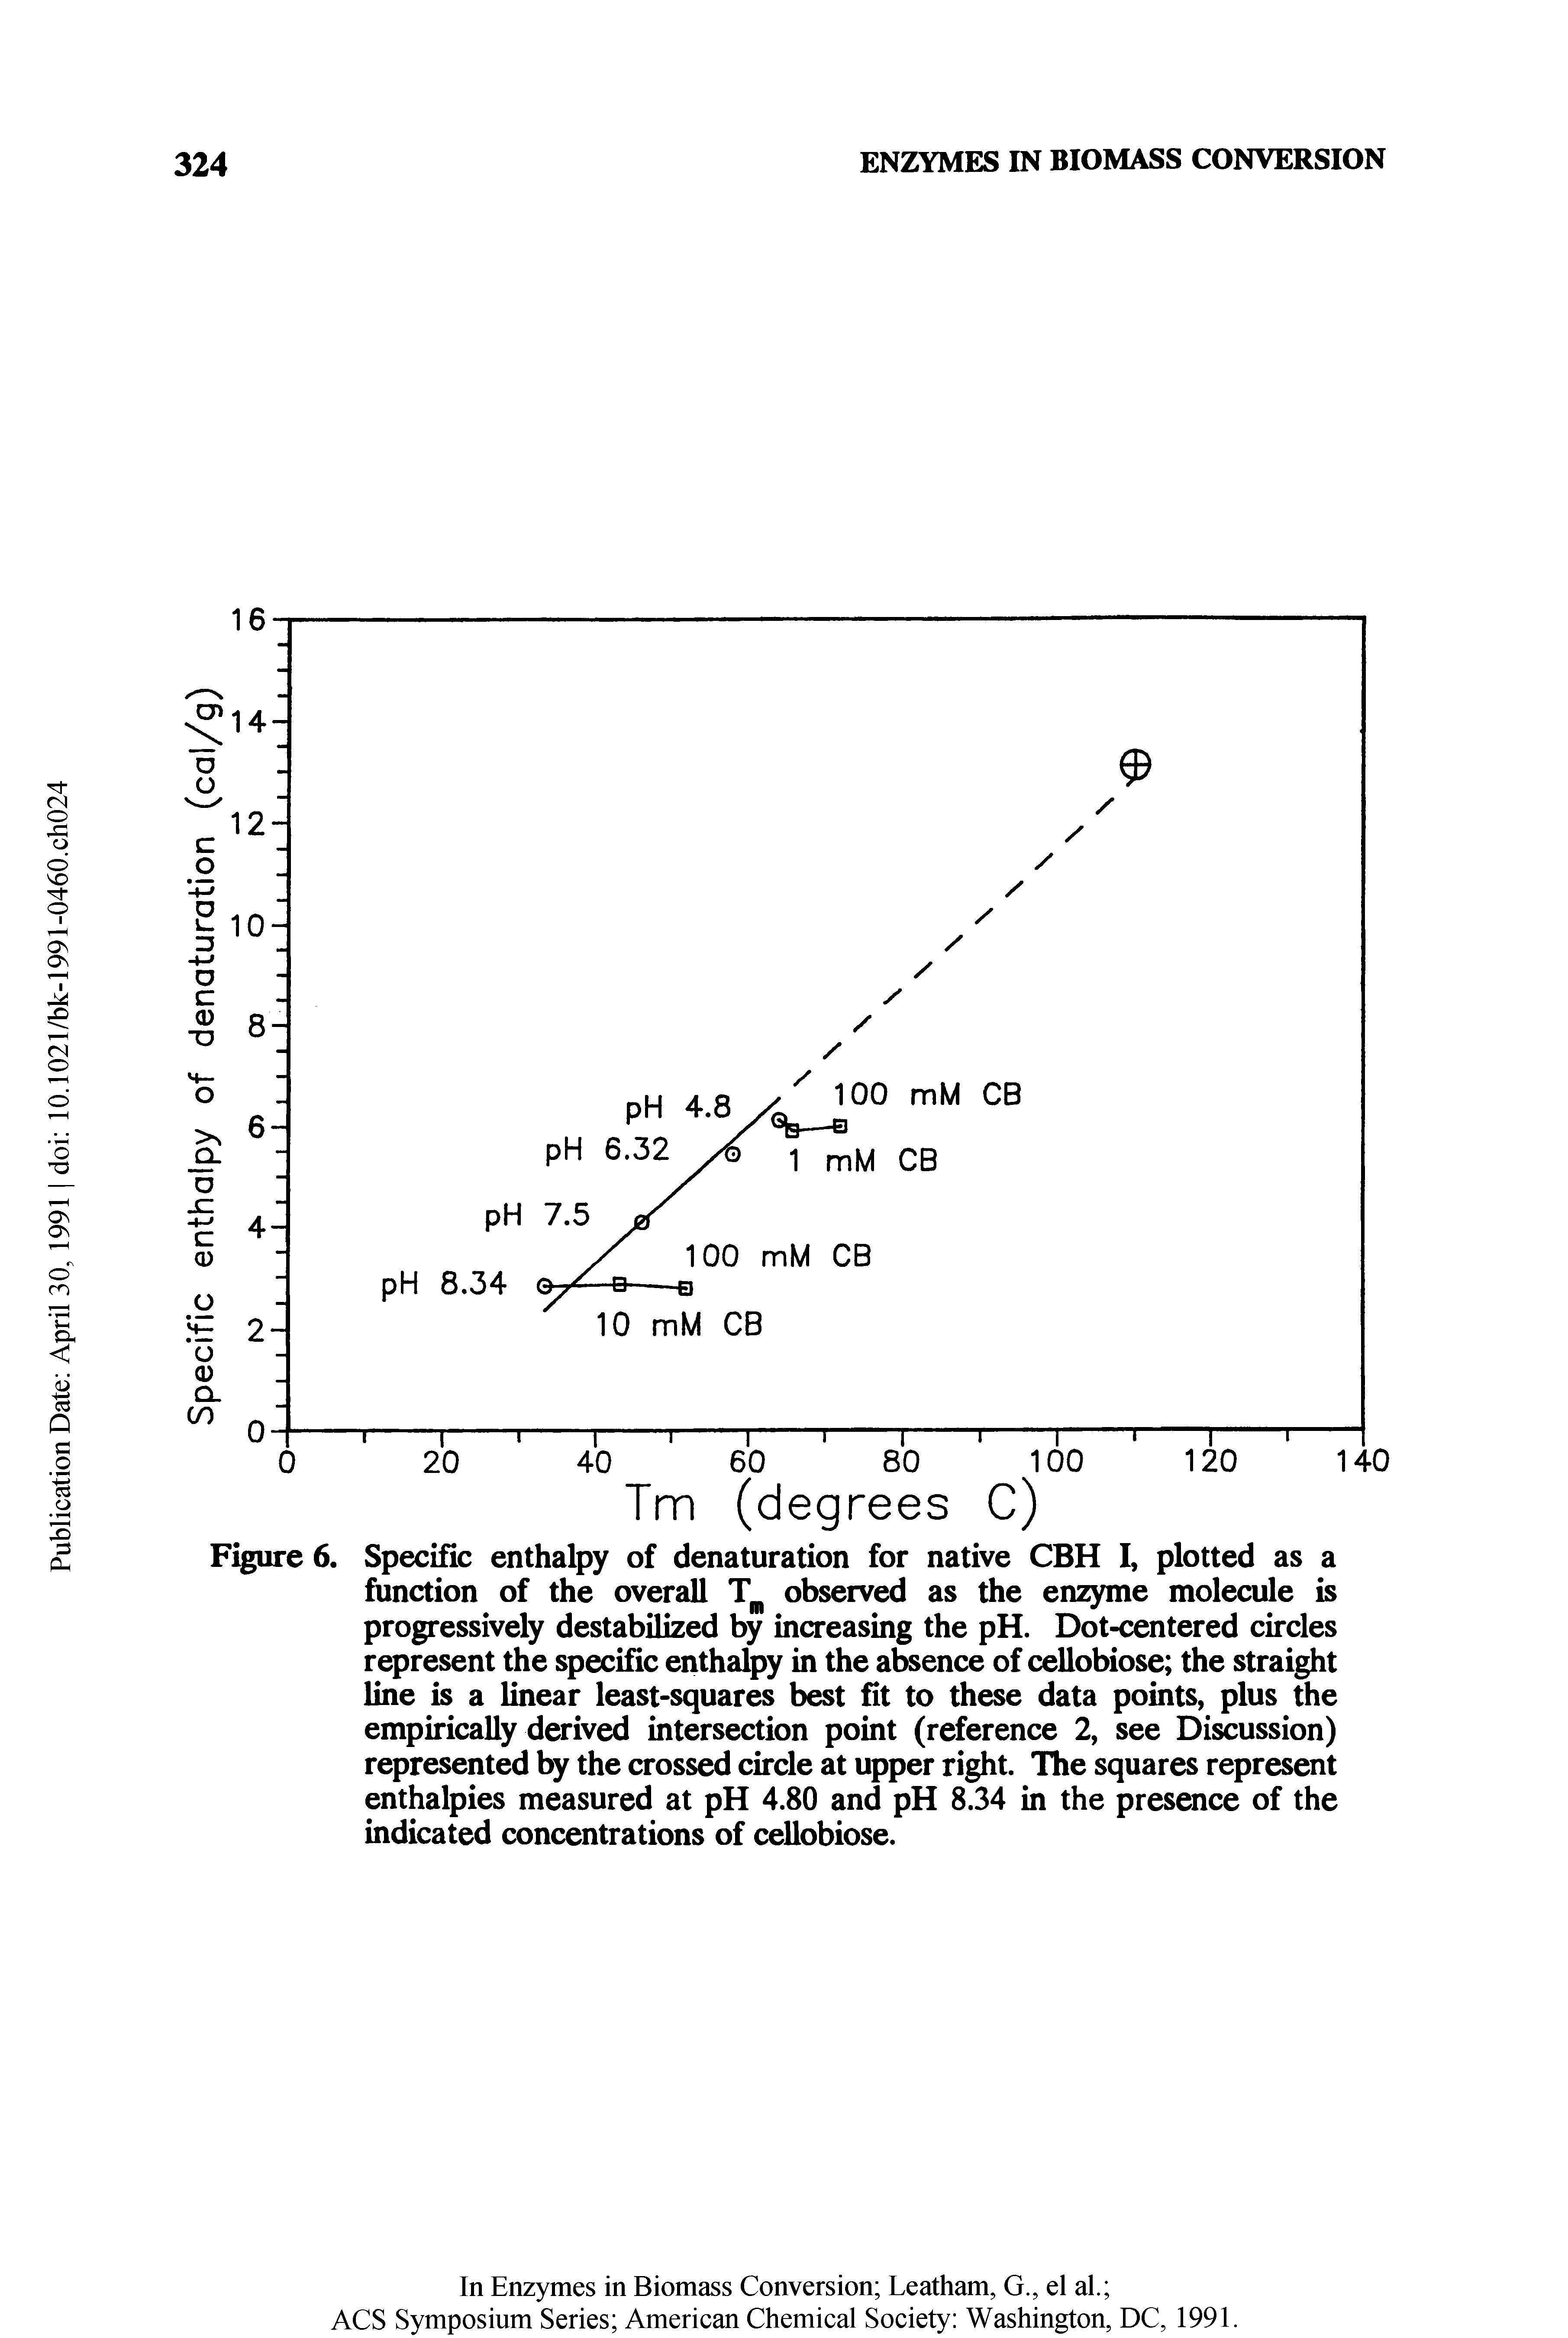 Figure 6. Specific enthalpy of denaturation for native CBH I, plotted as a function of the overall observed as the enzyme molecule is progressively destabilized by increasing the pH. Dot-centered circles represent the specific enthalpy in the absence of cellobiose the straight line is a linear least-squares best fit to these data points, plus the empirically derived intersection point (reference 2, see Discussion) represented by the crossed circle at upper right. The squares represent enthalpies measured at pH 4.80 and pH 8.34 in the presence of the indicated concentrations of cellobiose.